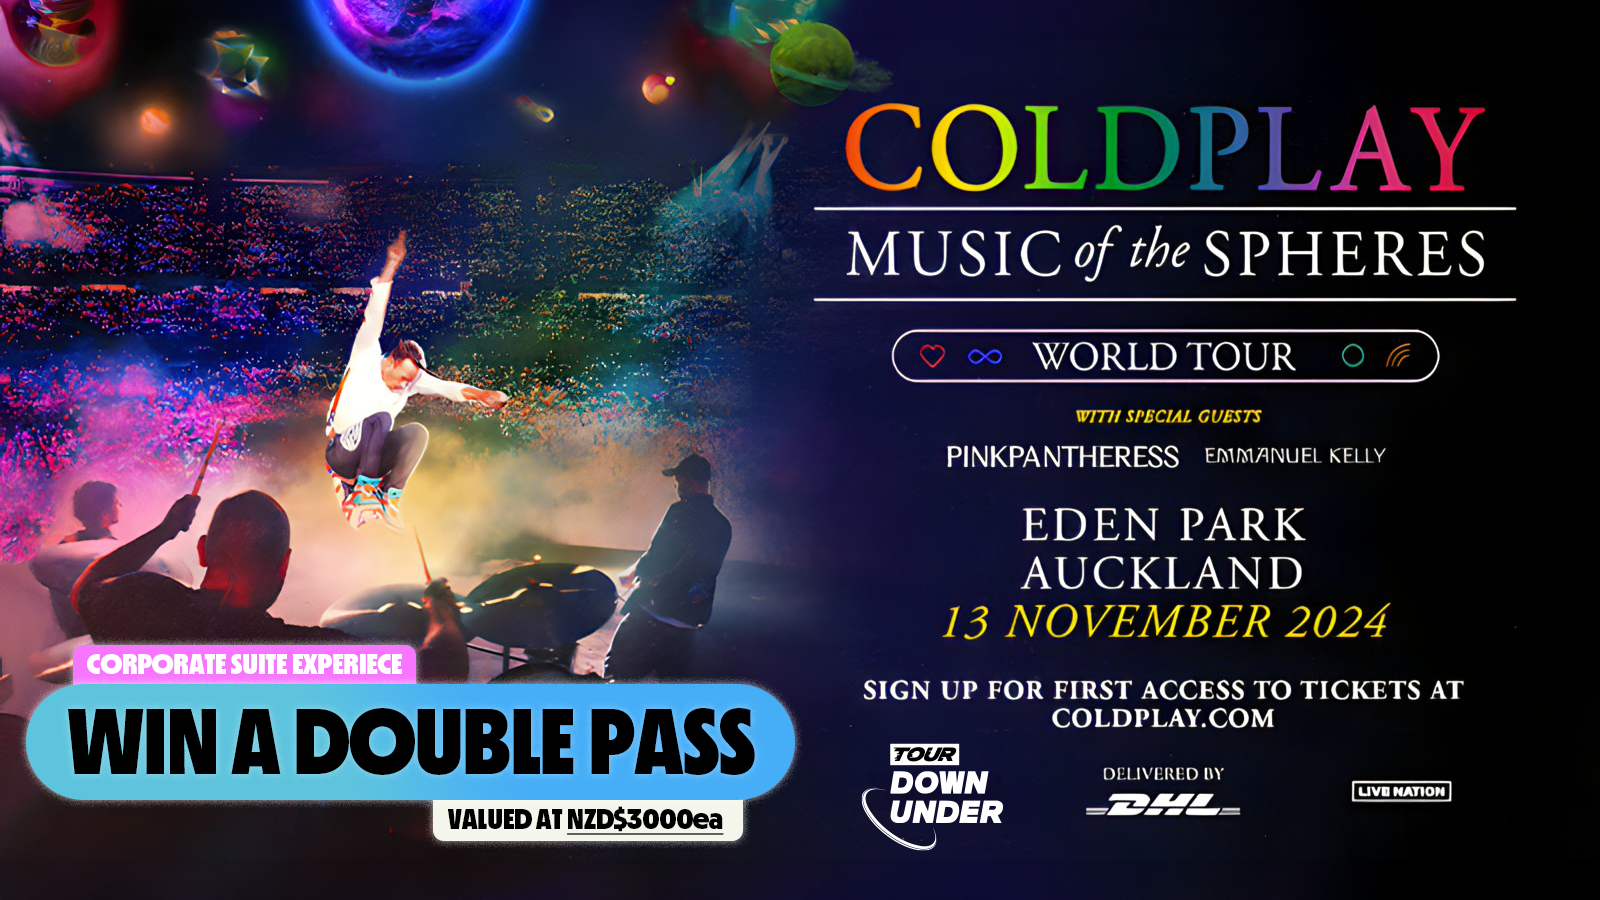 WIN AN EPIC COLDPLAY CORPORATE SUITE EXPERIENCE!